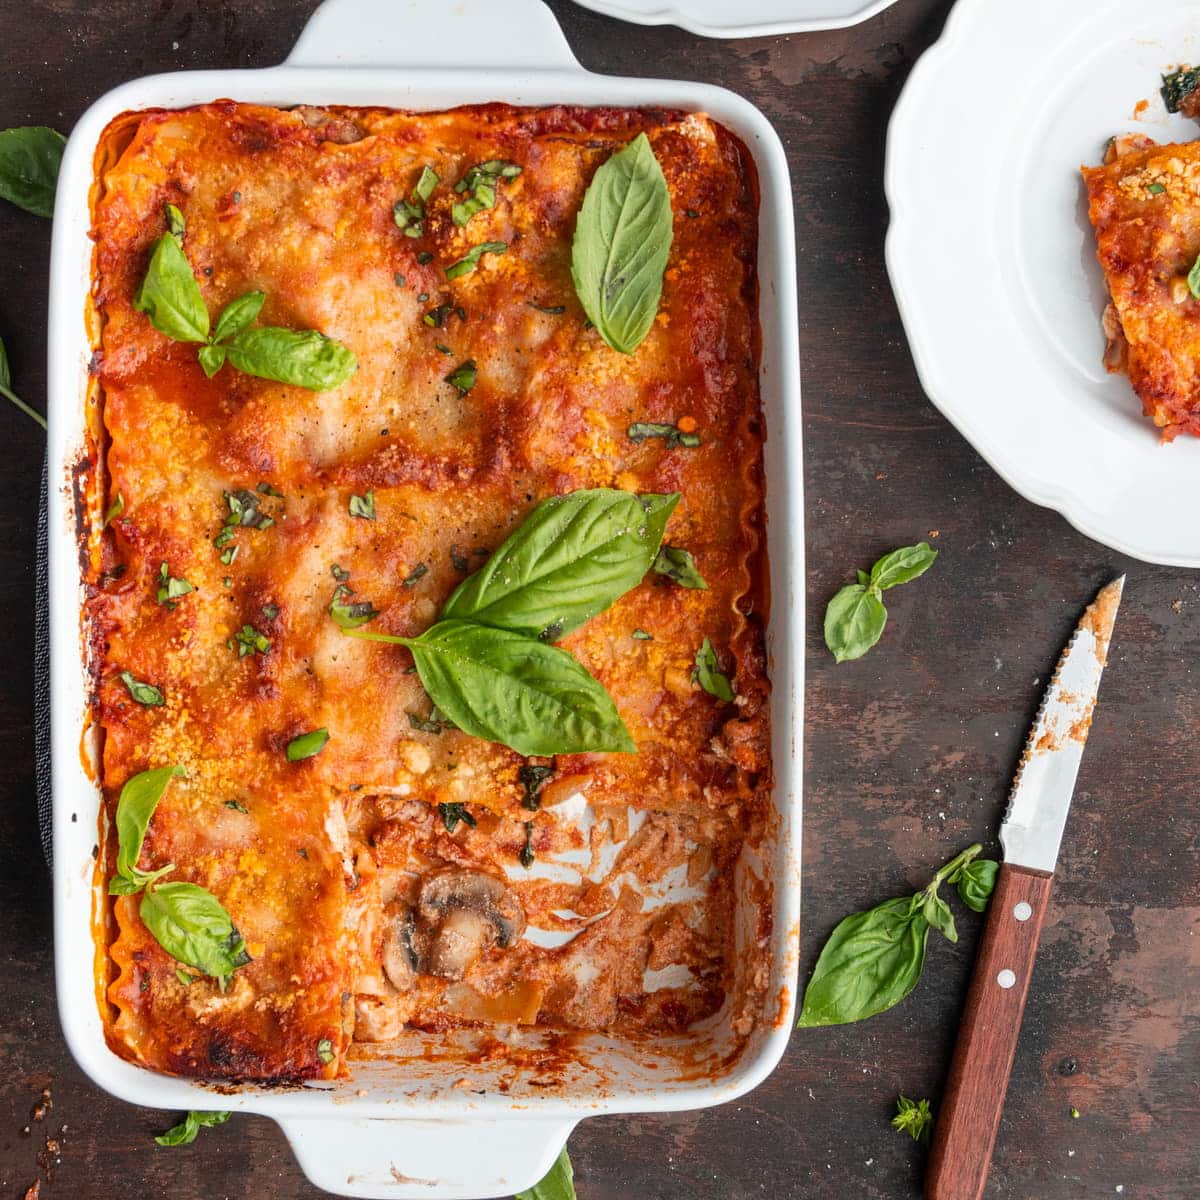 meatless lasagna fresh out of the oven